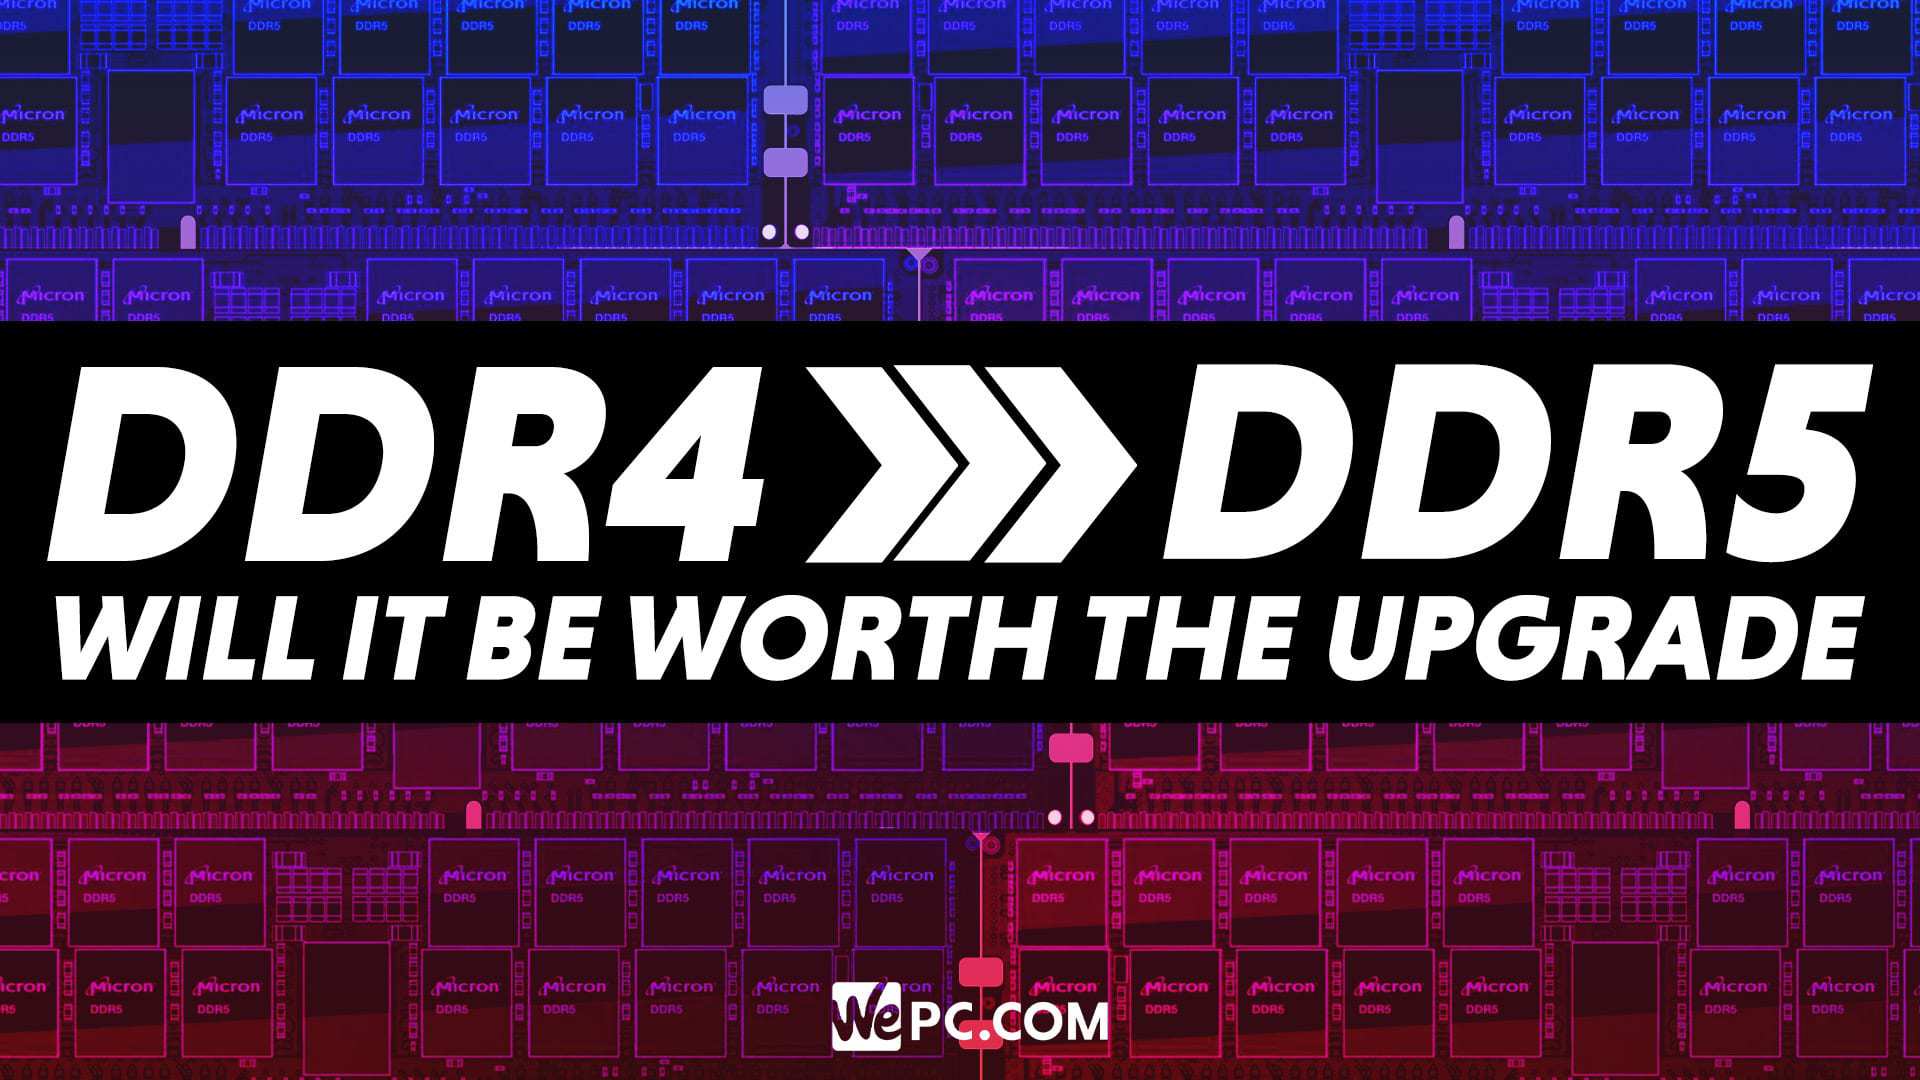 DDR5 vs DDR4: Is It Time To Upgrade Your RAM?